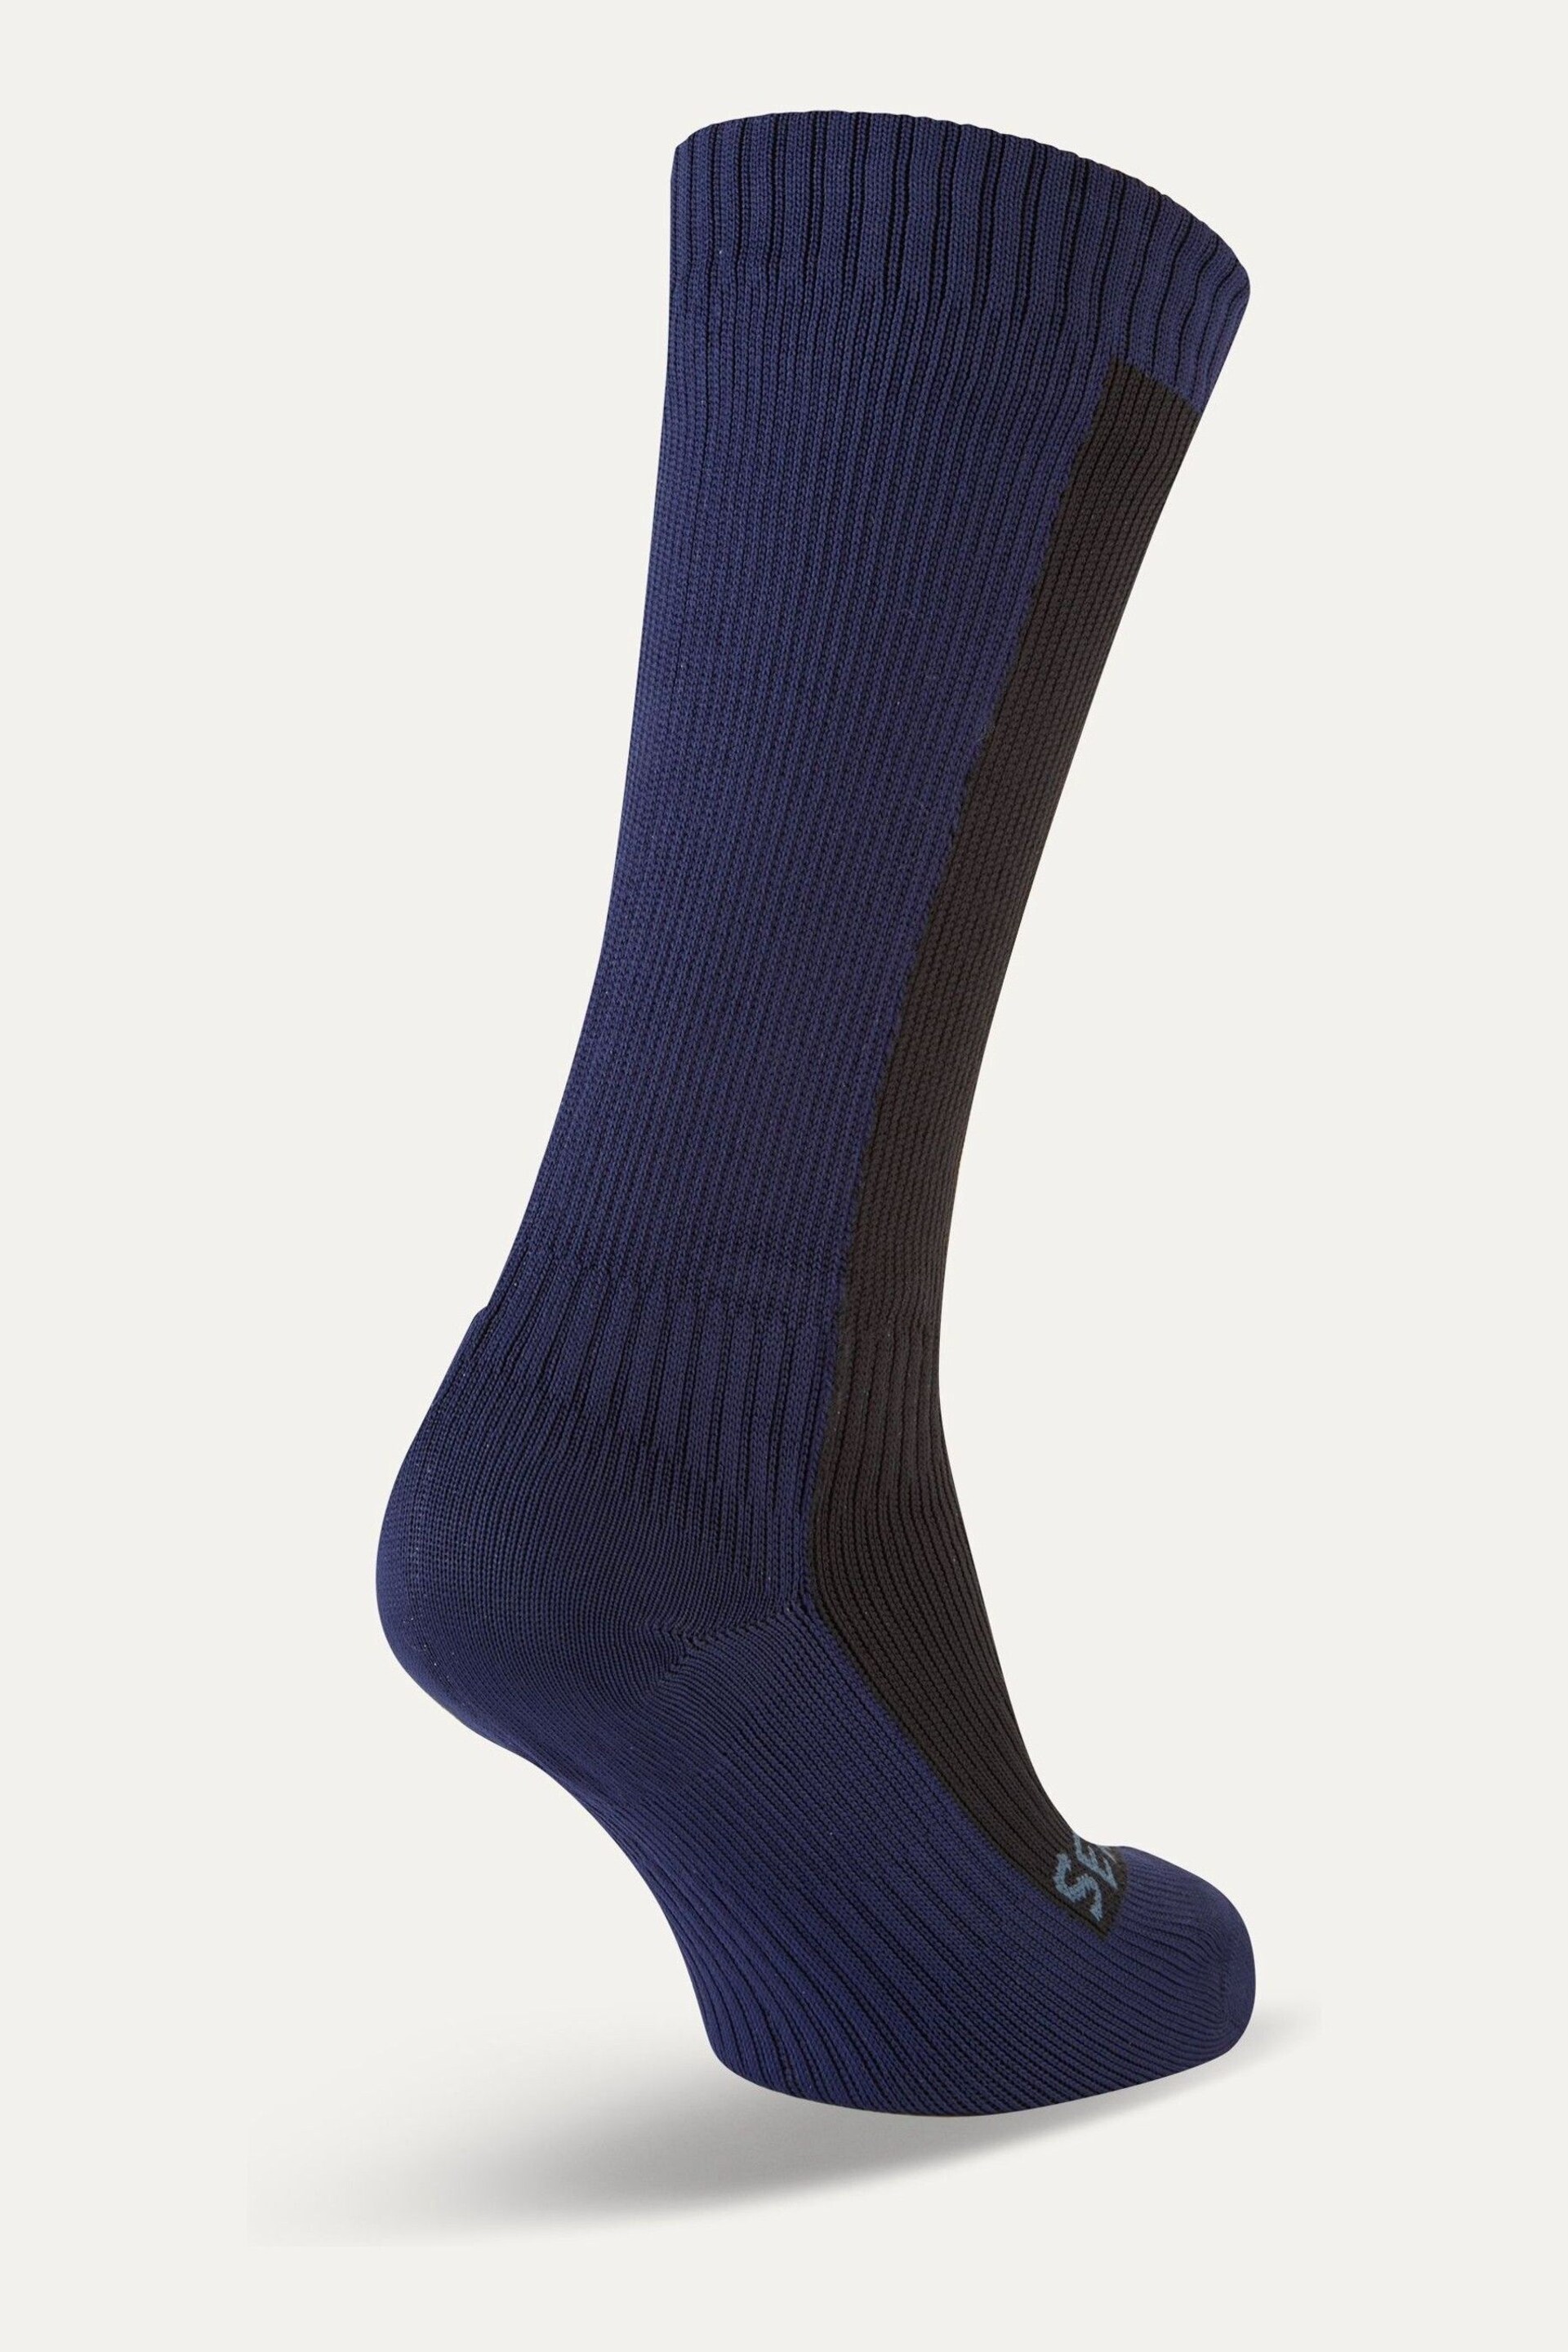 Sealskinz Blue Starston Waterproof Cold Weather Mid Length Socks - Image 2 of 2